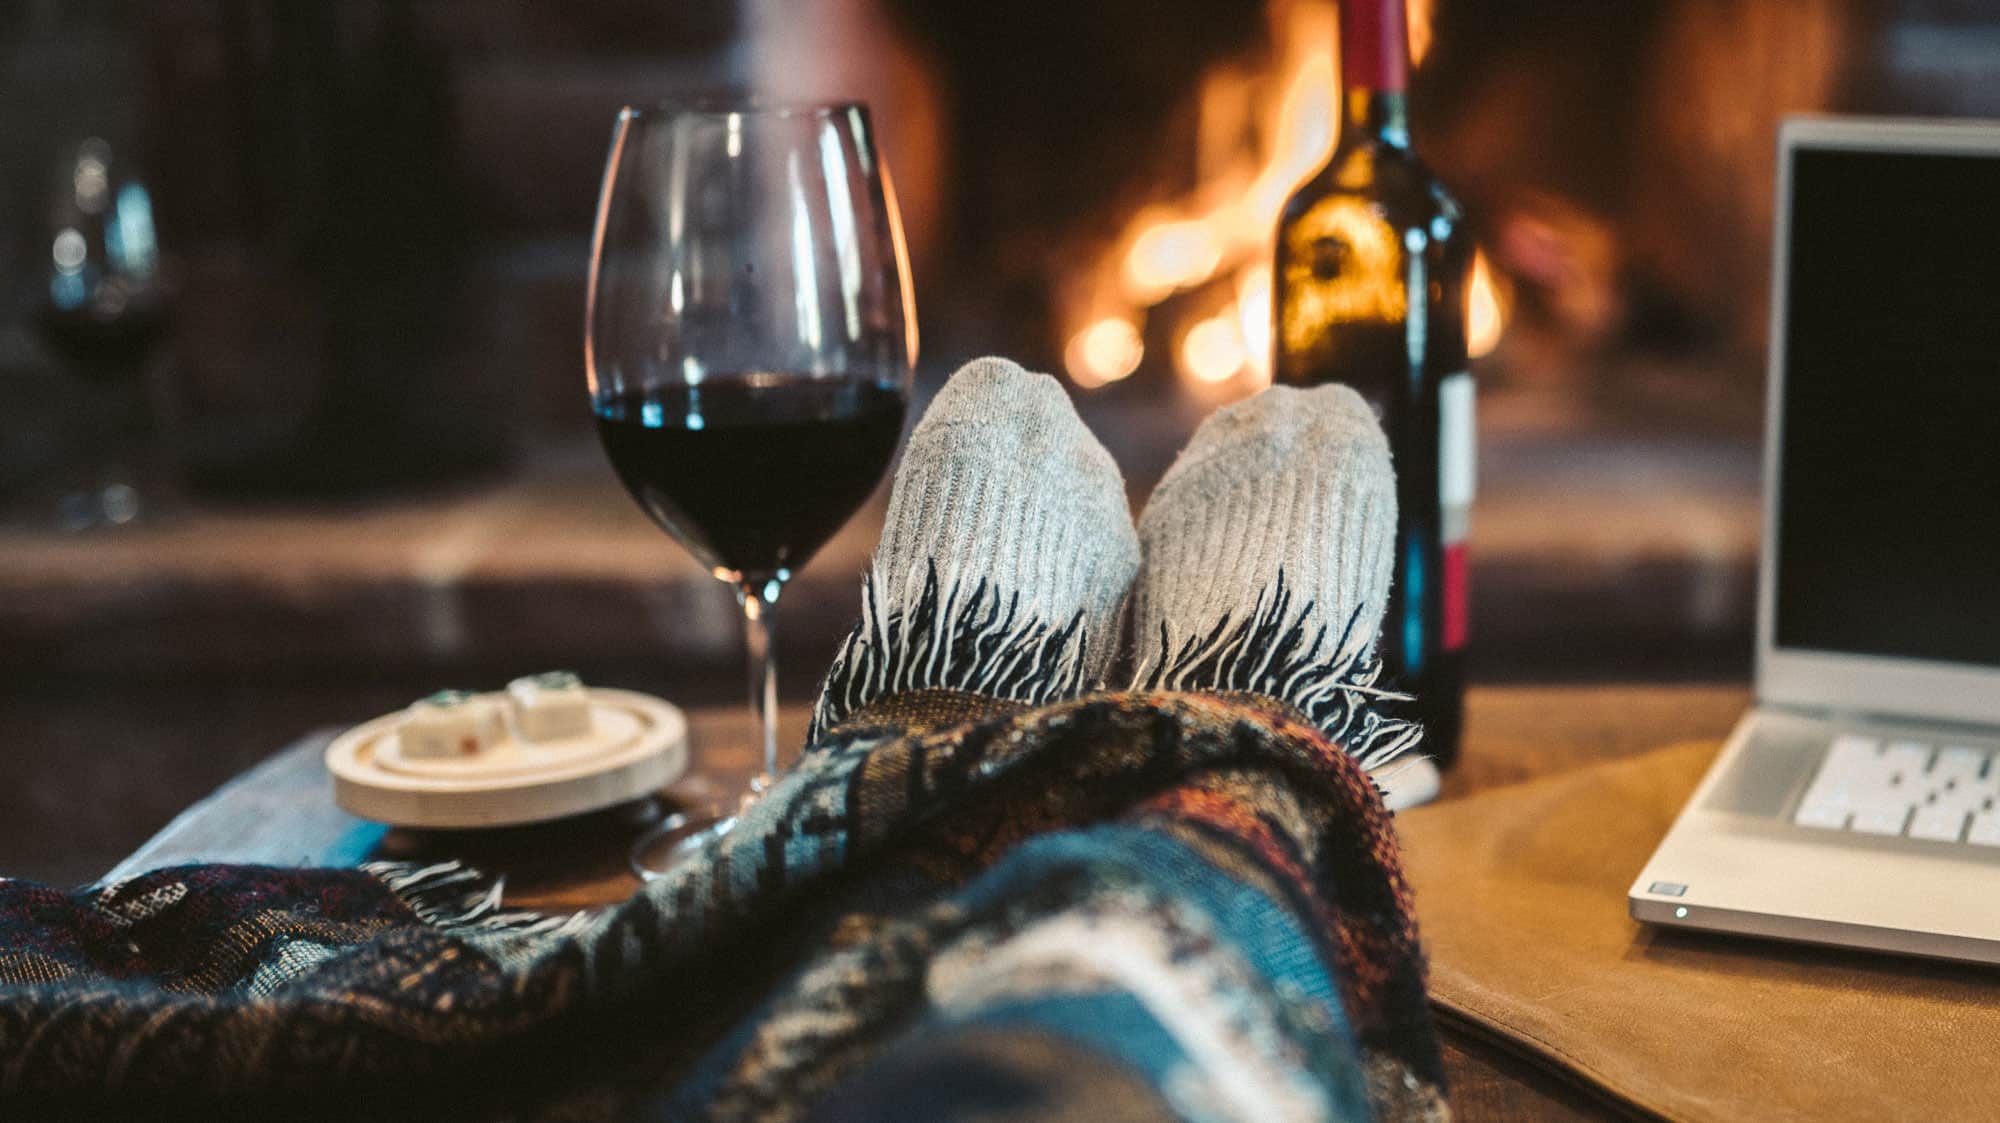 Feet up with Glass of Wine in front of fireplace